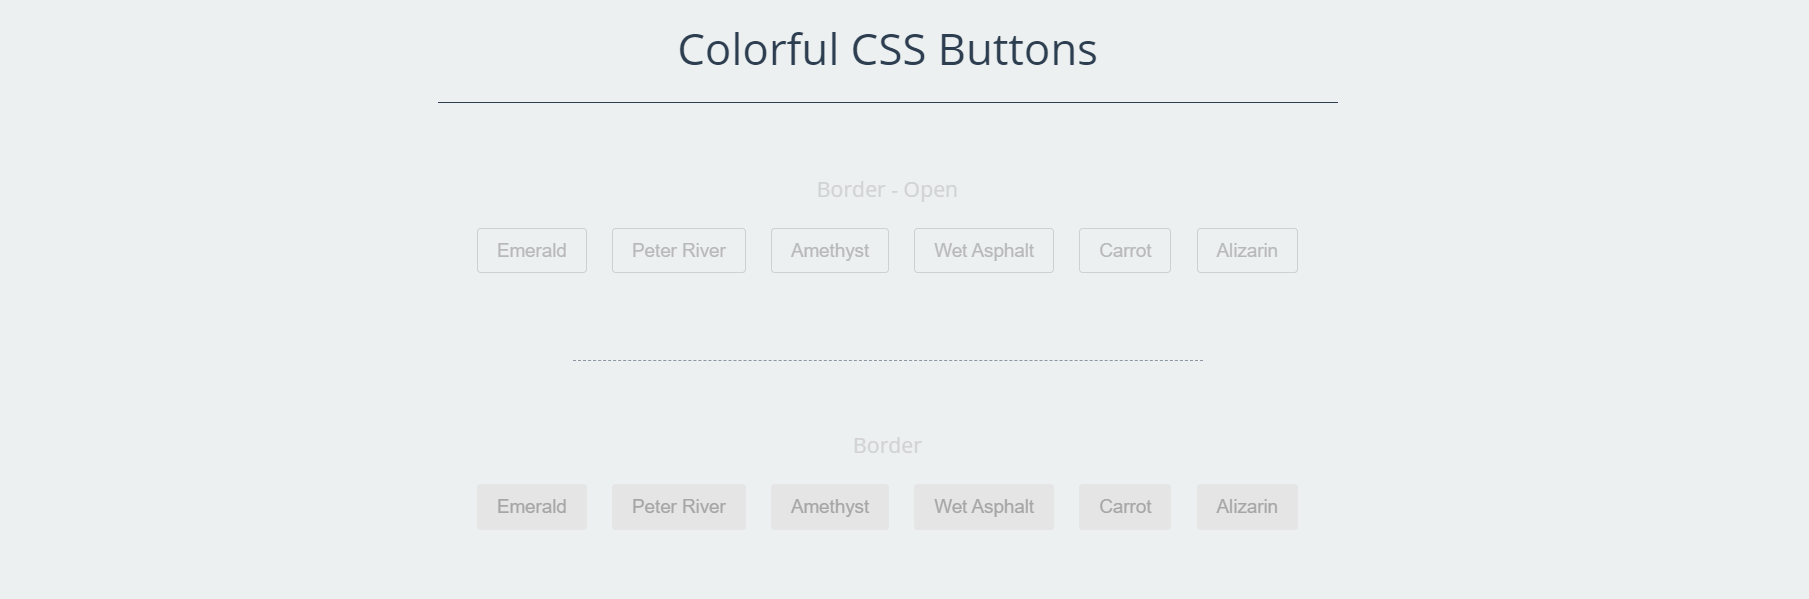 Colorful CSS Buttons